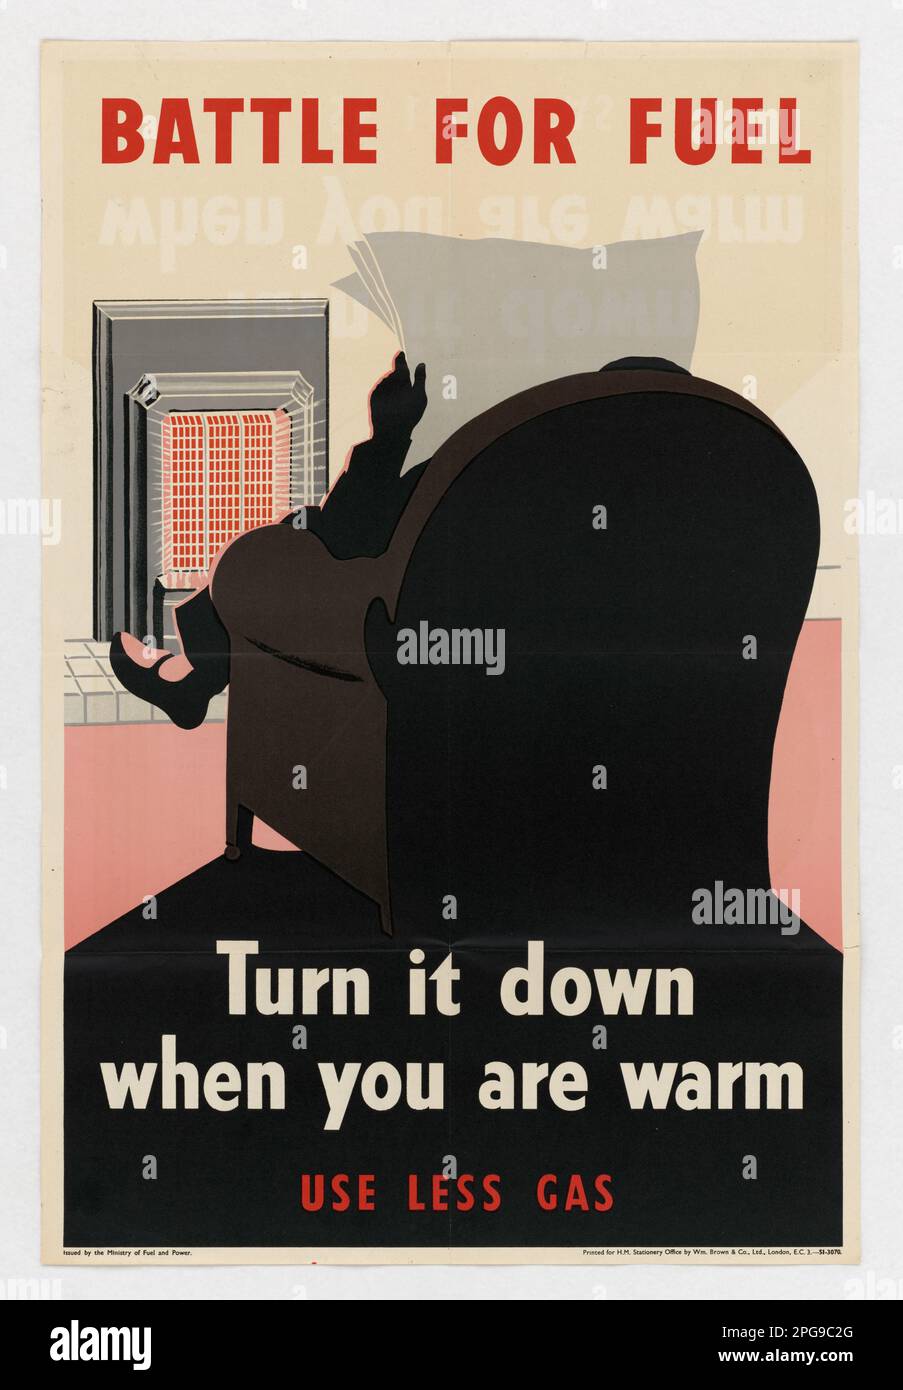 Battle for Fuel - Turn it Down When You are Warm. Country: England Printed By: Wm. Brown & Co., Ltd.. 1942 - 1945.  Office for Emergency Management. Office of War Information. Domestic Operations Branch. Bureau of Special Services. 3/9/1943-9/15/1945. World War II Foreign Posters Stock Photo